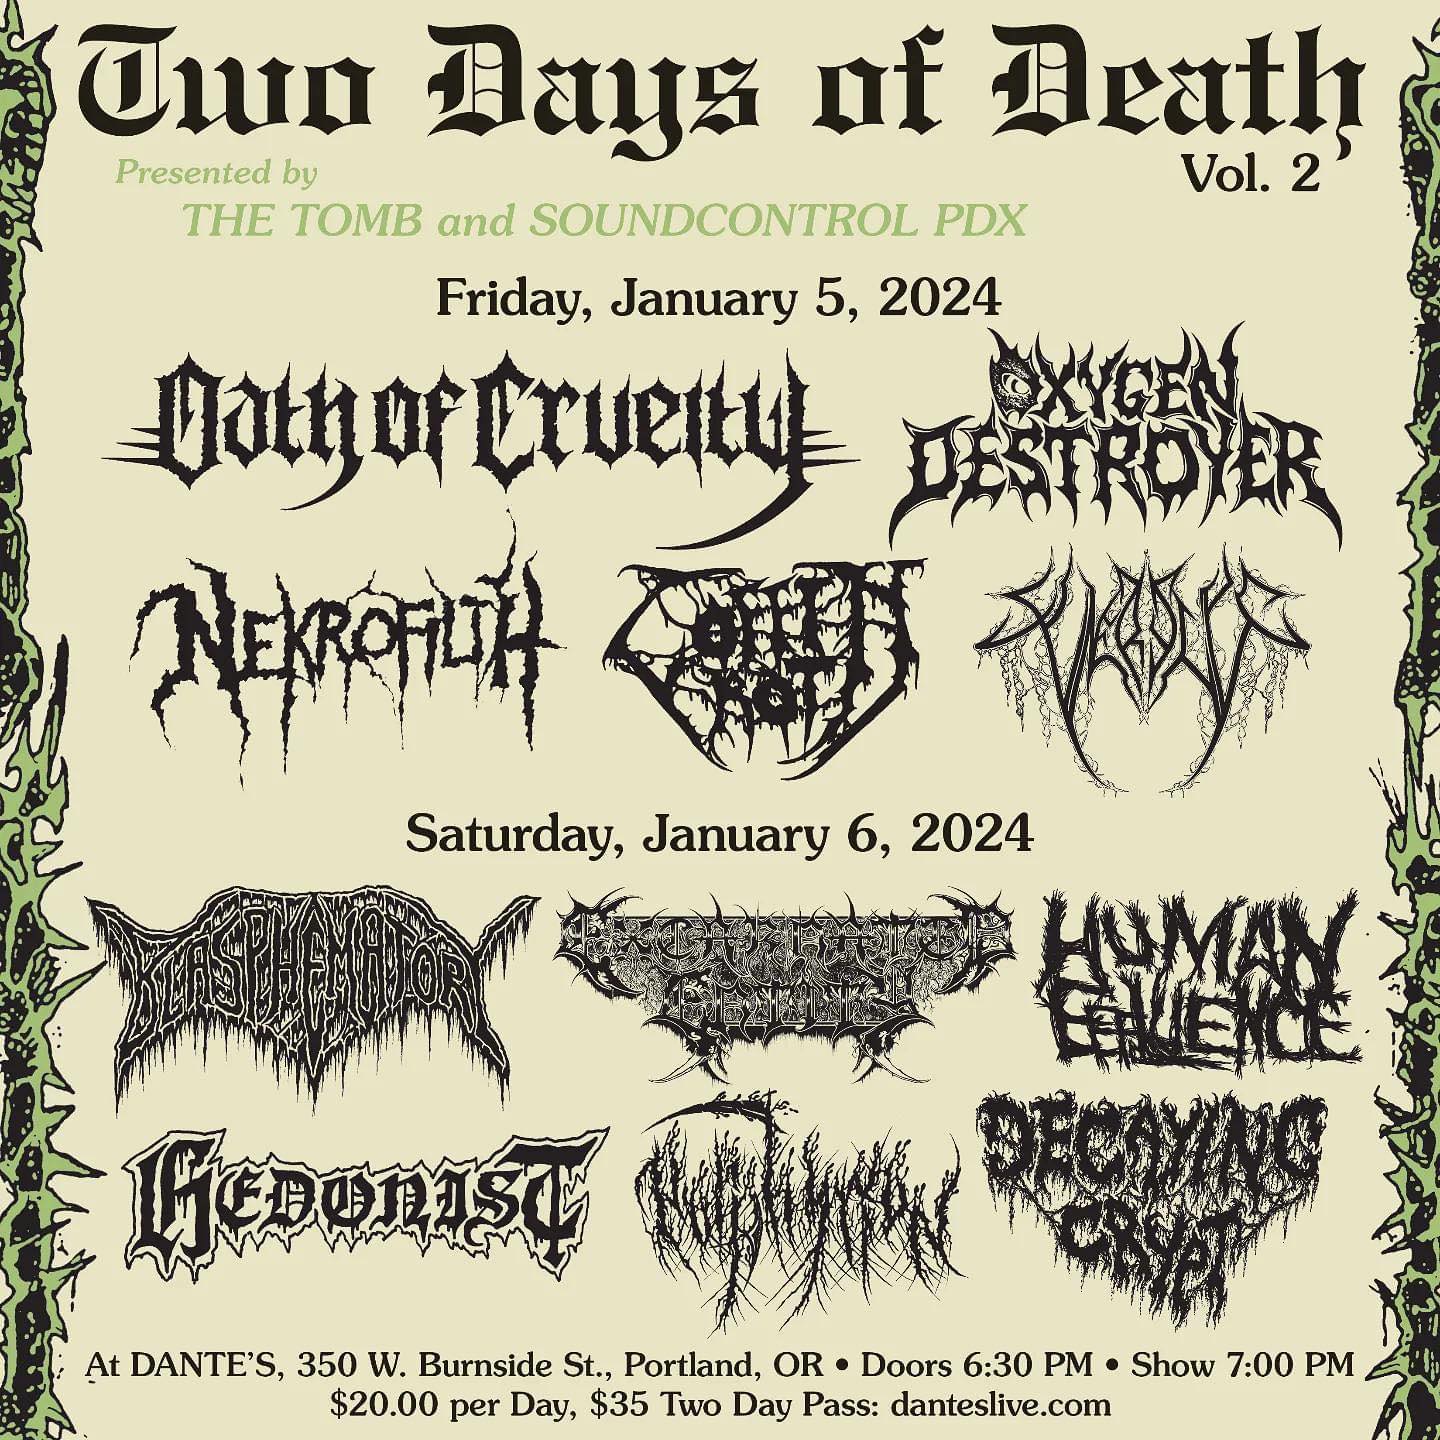 Two Days of Death Vol. 2 – Oath of Cruelty, Oxygen Destroyer, Nekrofilth, Coffin Rot, Funerelic, Blasphematory, Excarnated Entity, Human Effluence, Hedonist, Porphyrion, Decaying Crypt